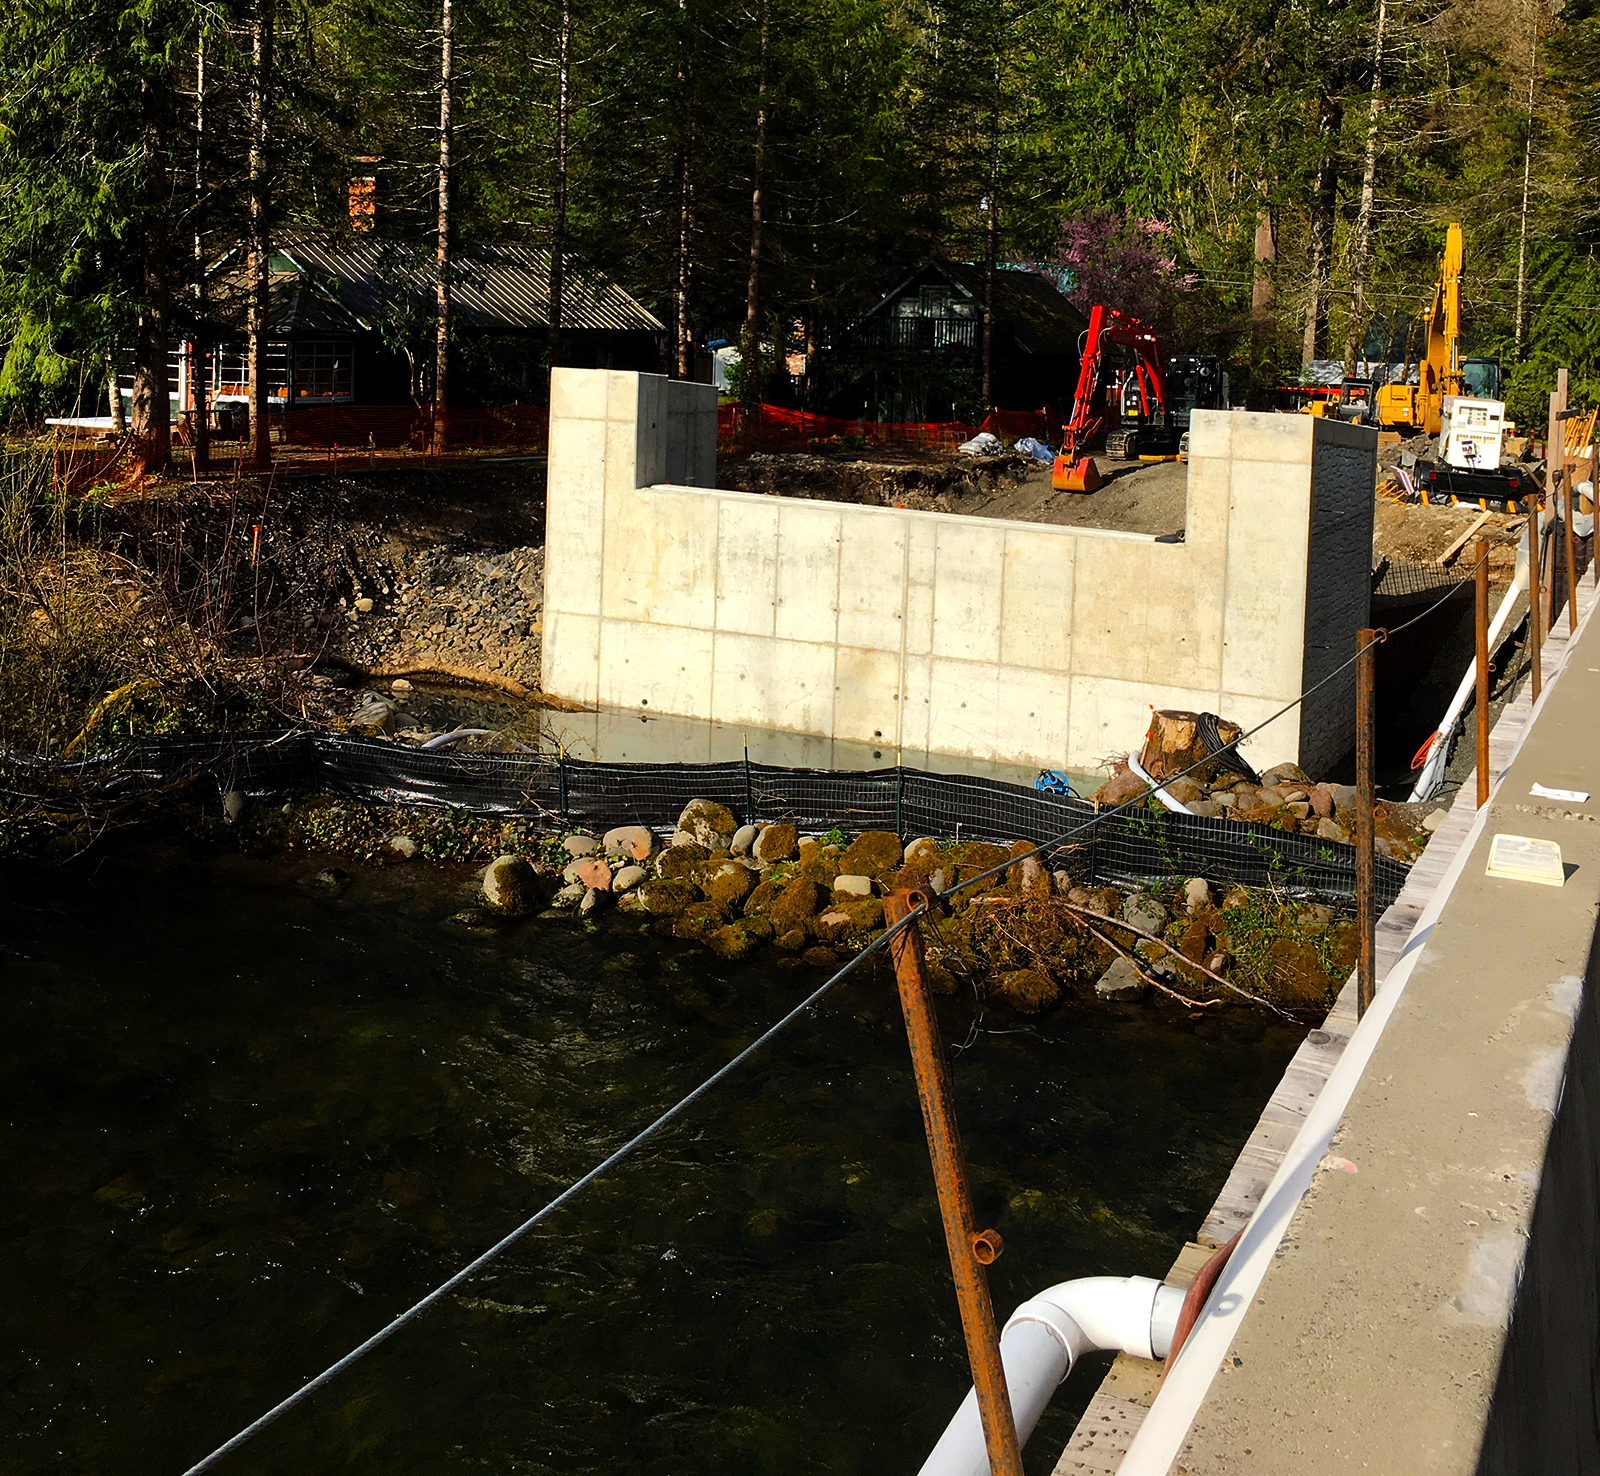 Construction work on the bridge supports